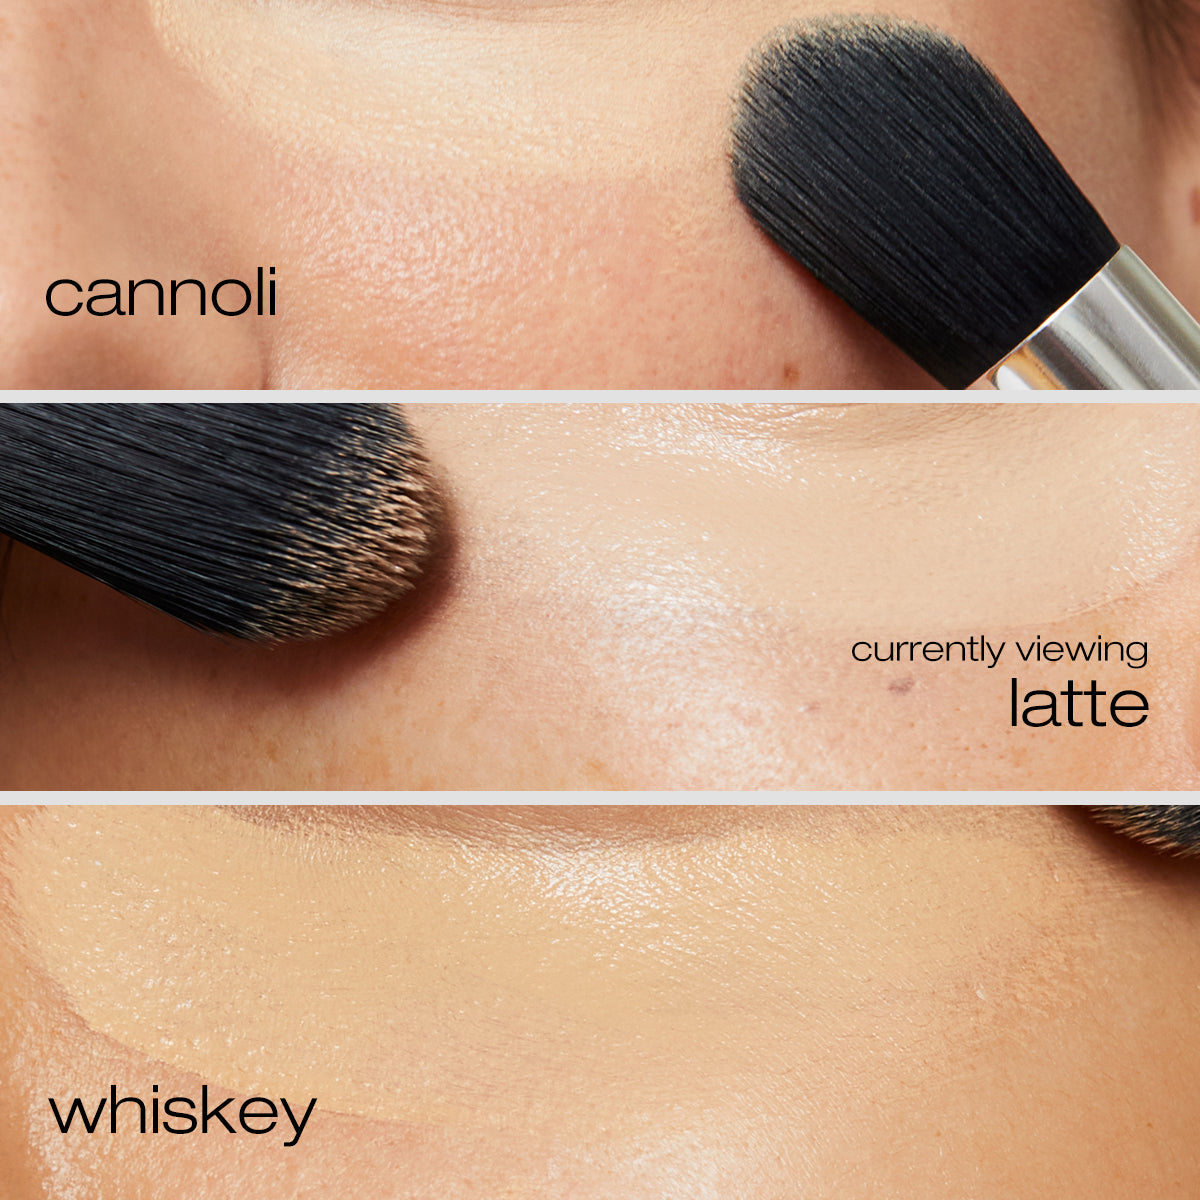 Cannoli, latte, and whiskey concealer refill covering undereyes